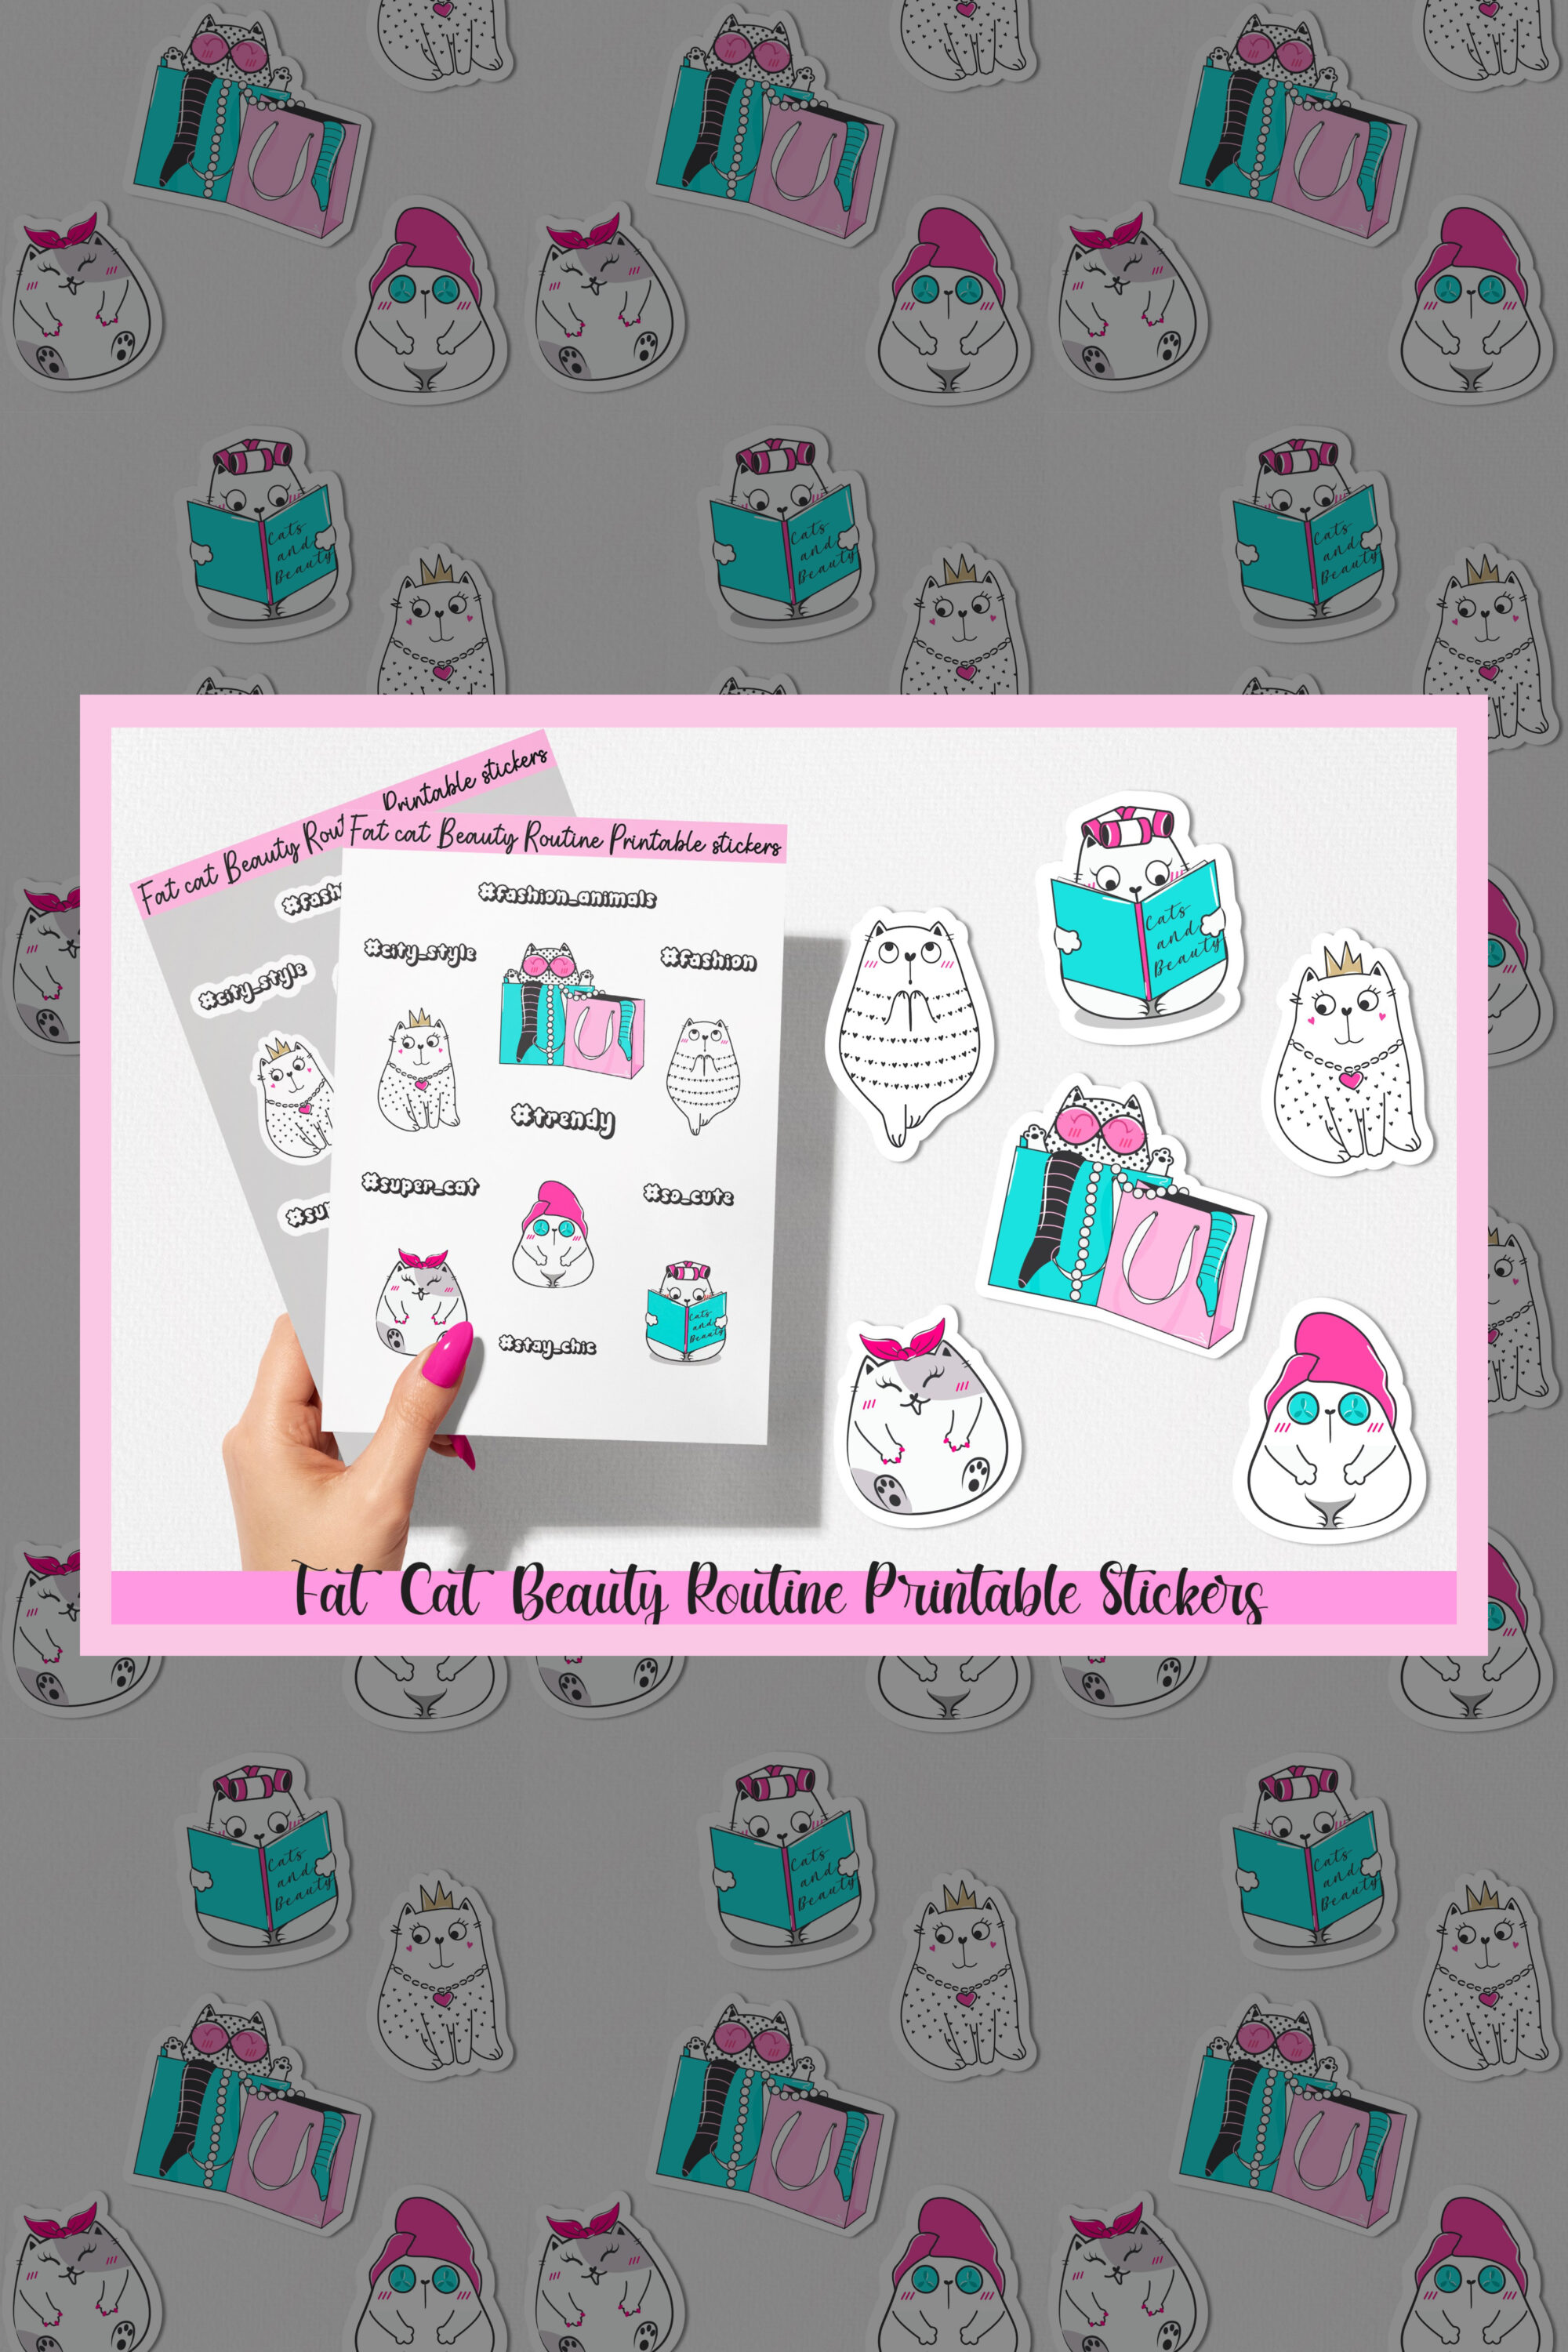 Fat cat beauty routine printable stickers of pinterest.